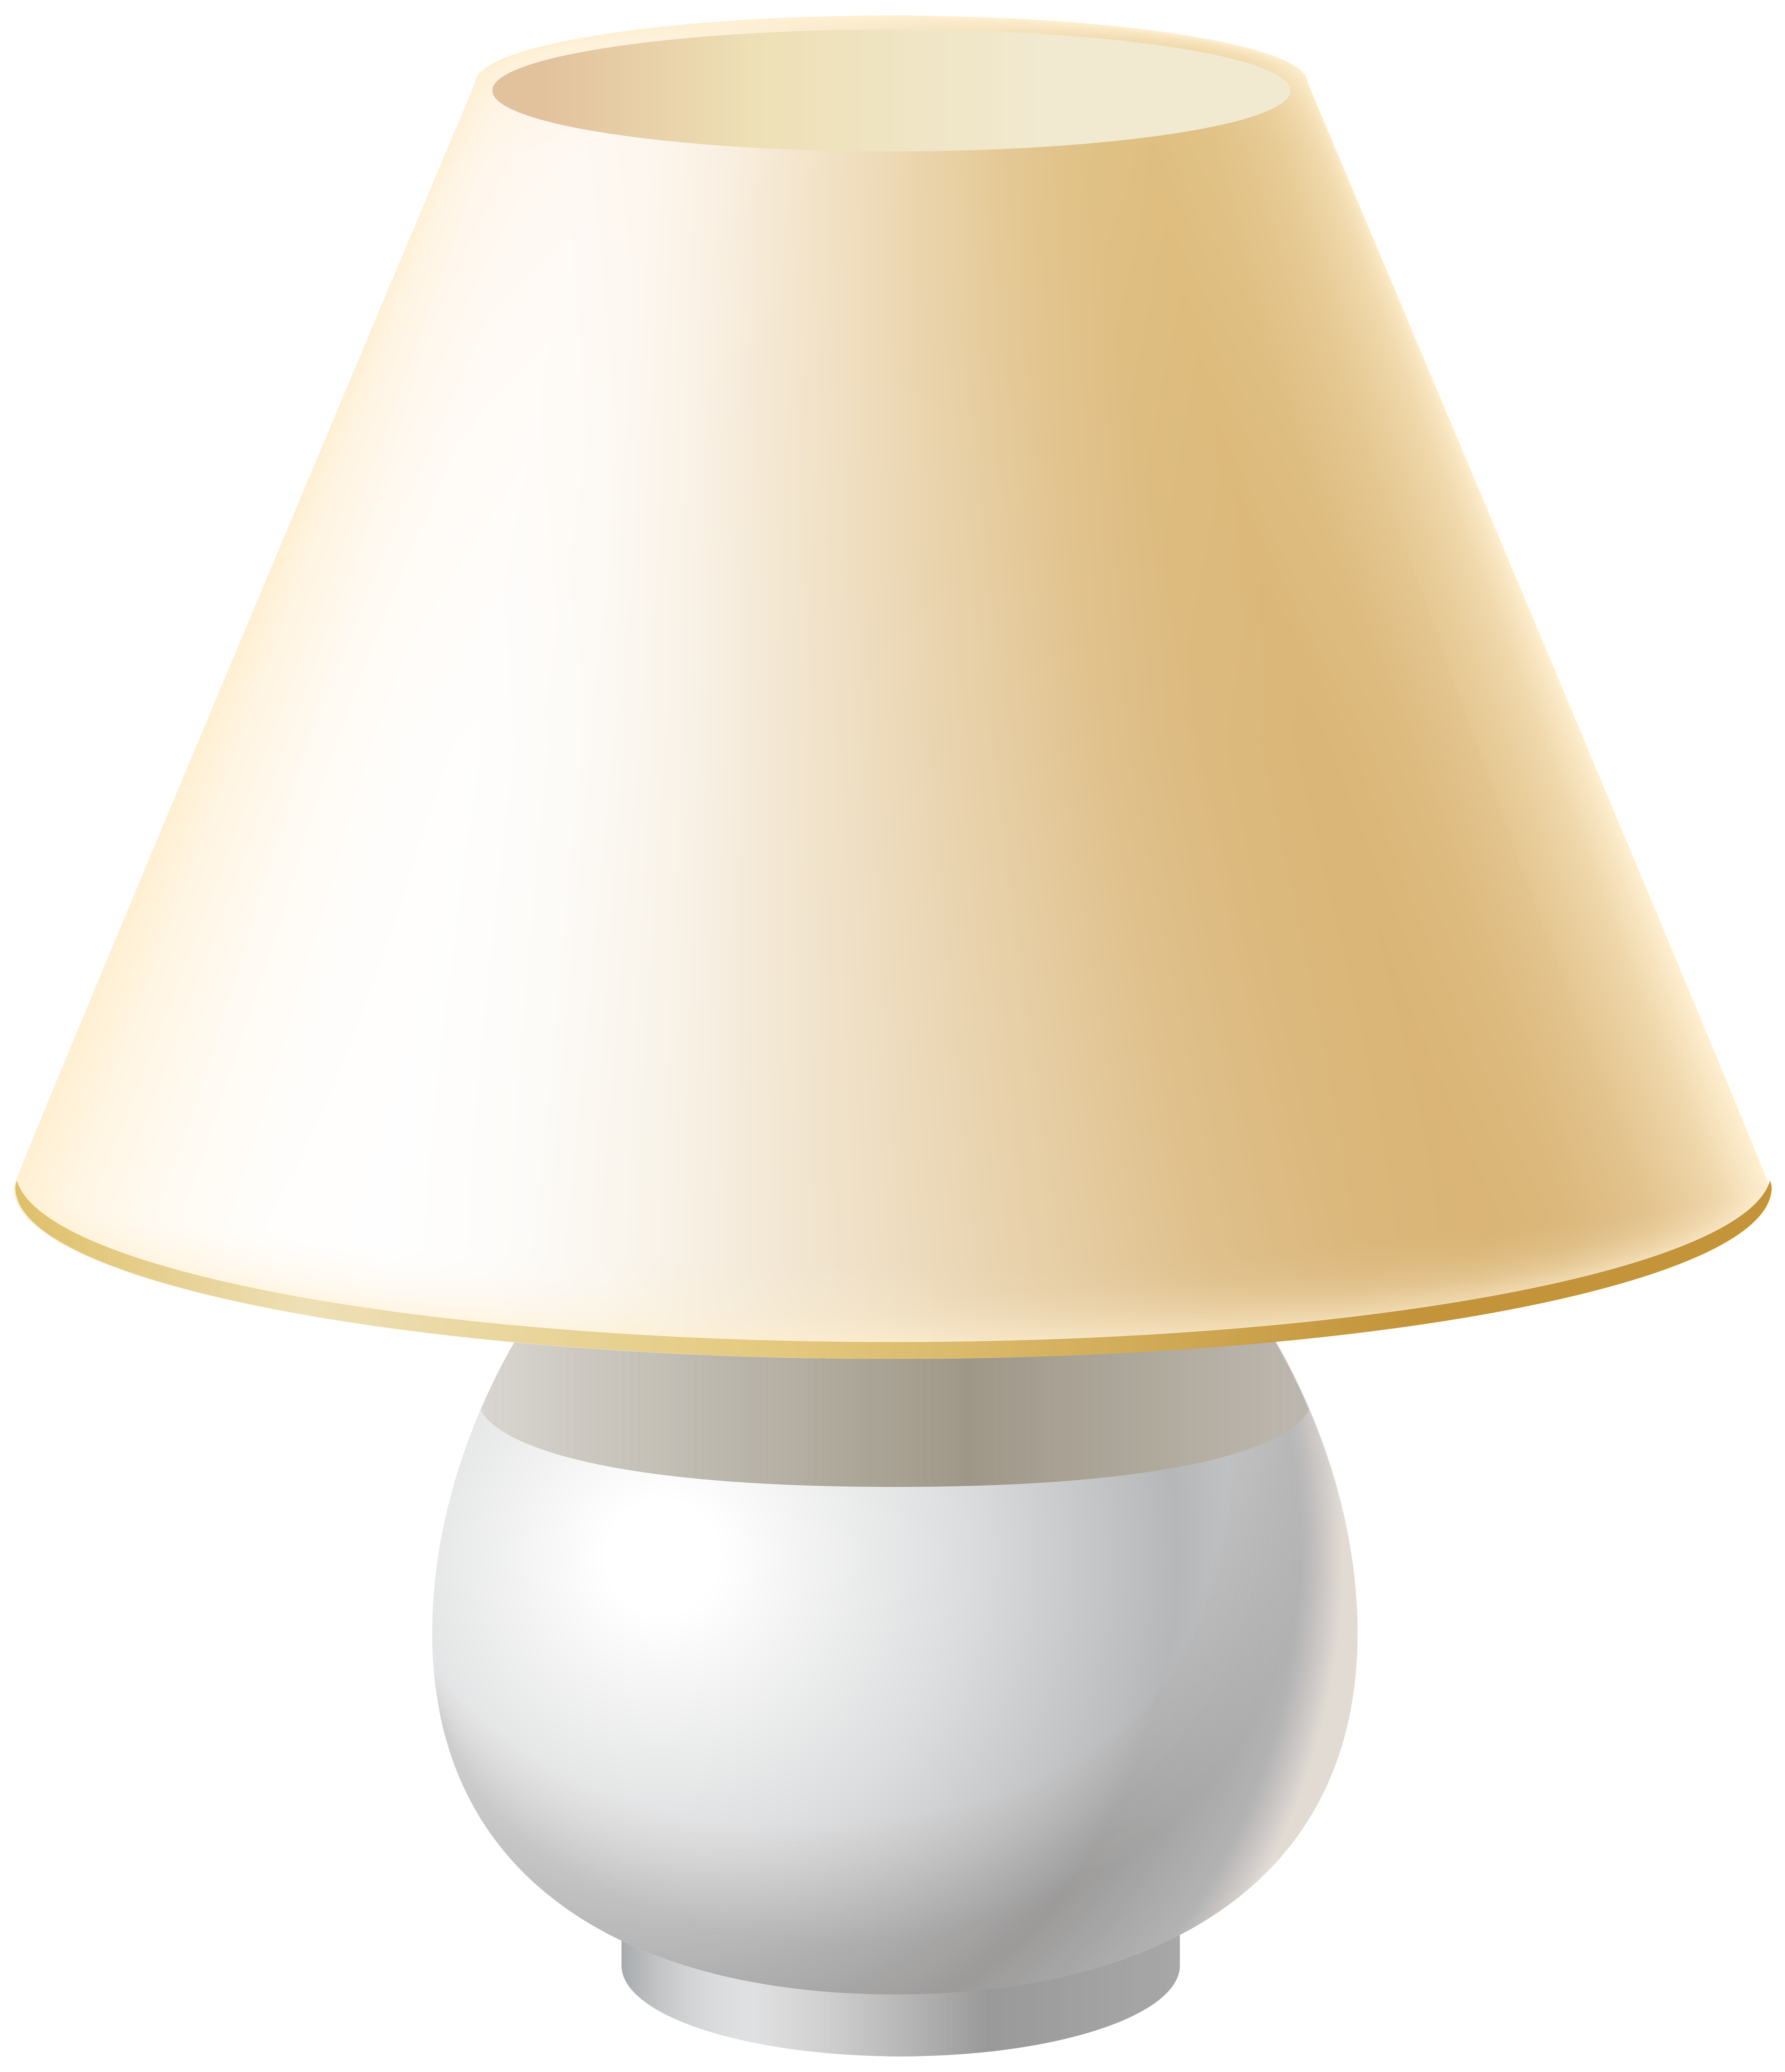 Table lamp png interesting. Lights clipart light fixture